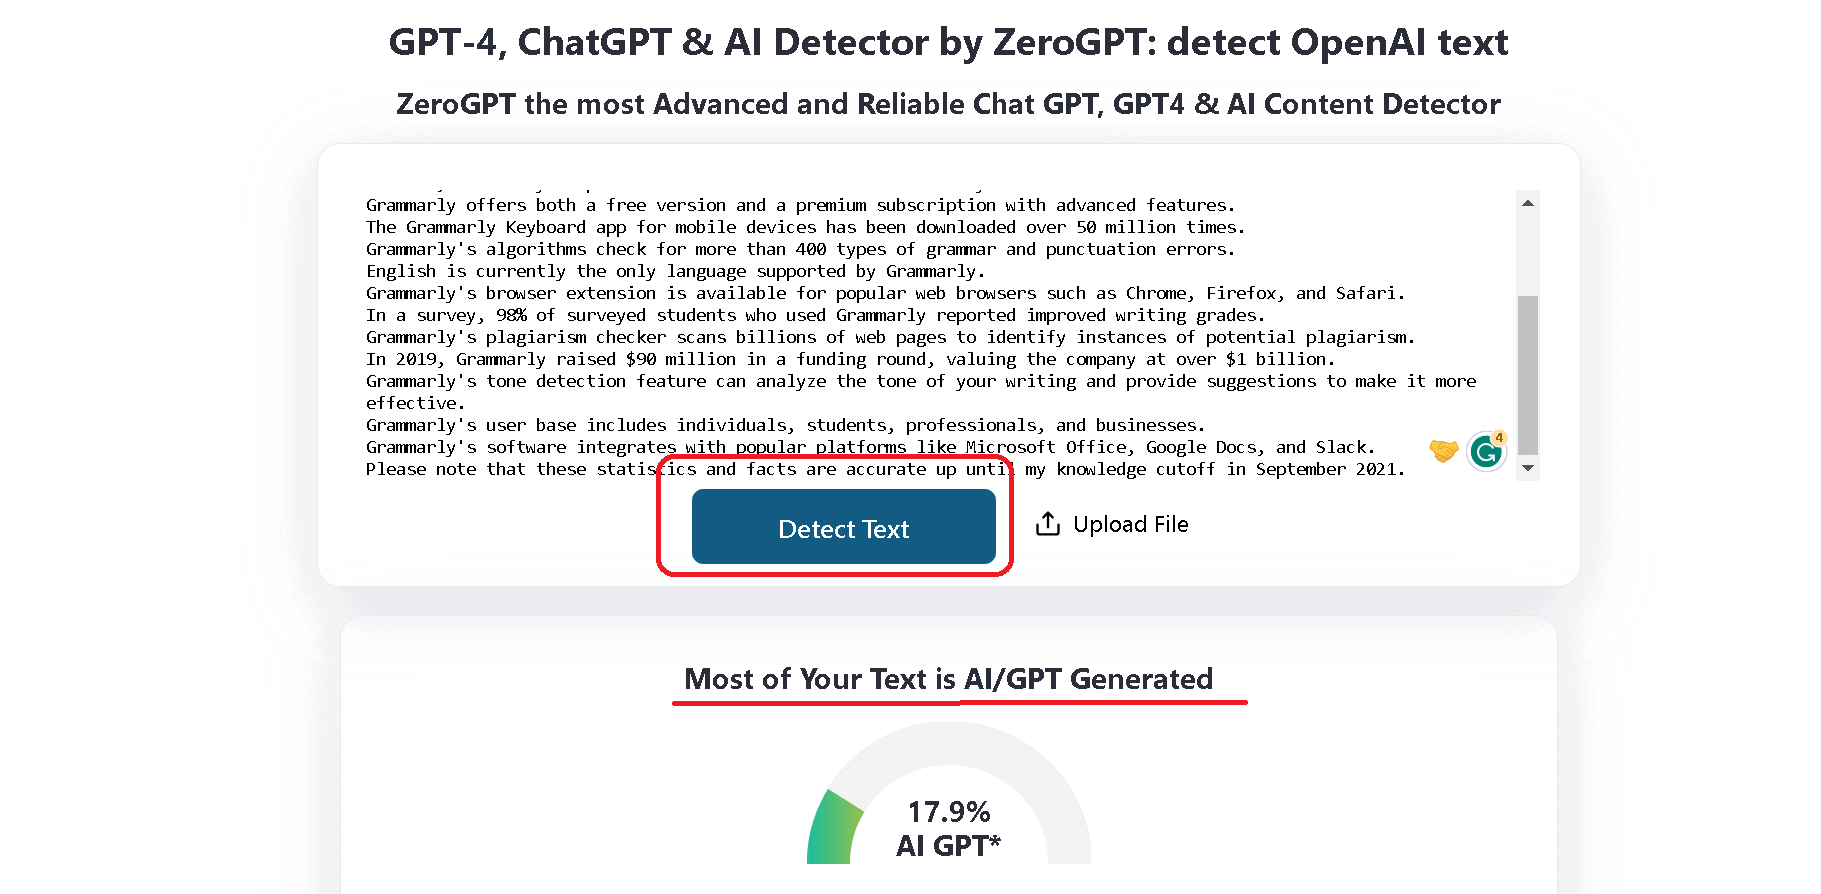 ZeroGPT correctly detected ChatGPT generated text